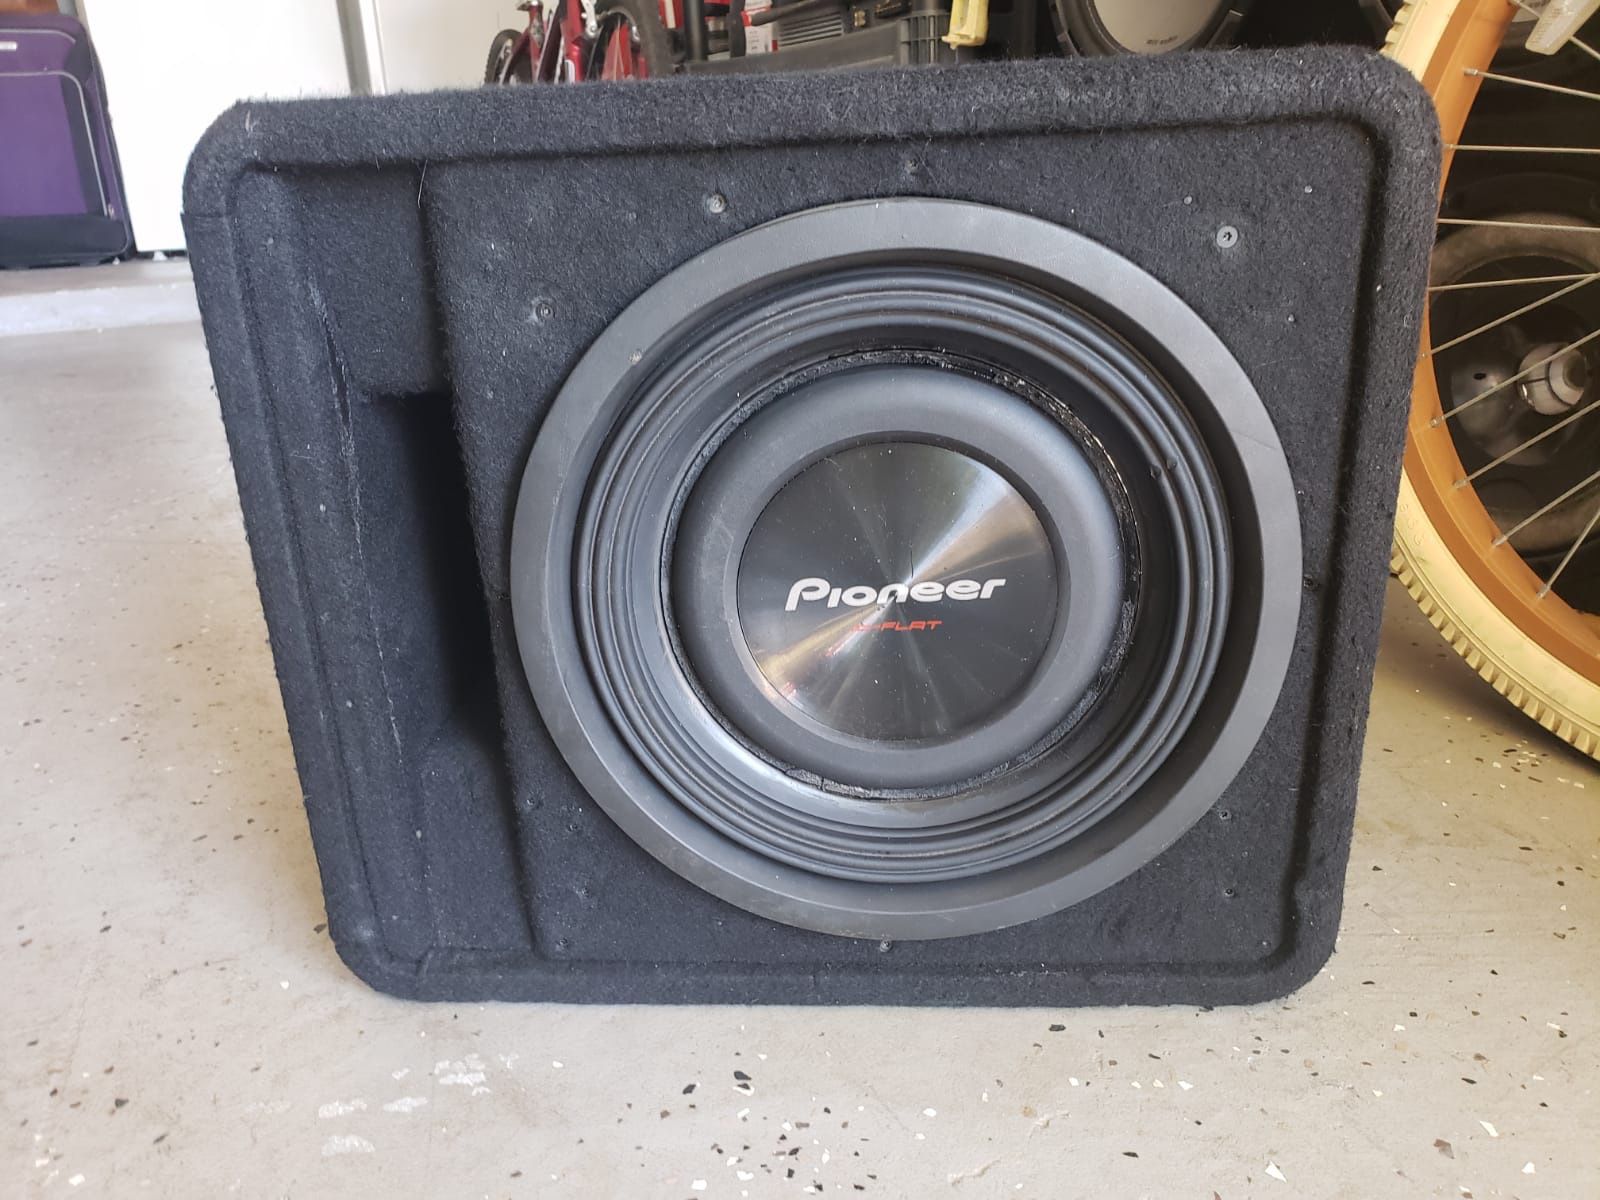 Alpine Subwoofer 12” 1500 Watts in a ported box Kicker Dual Coil 2 ohms in good condition